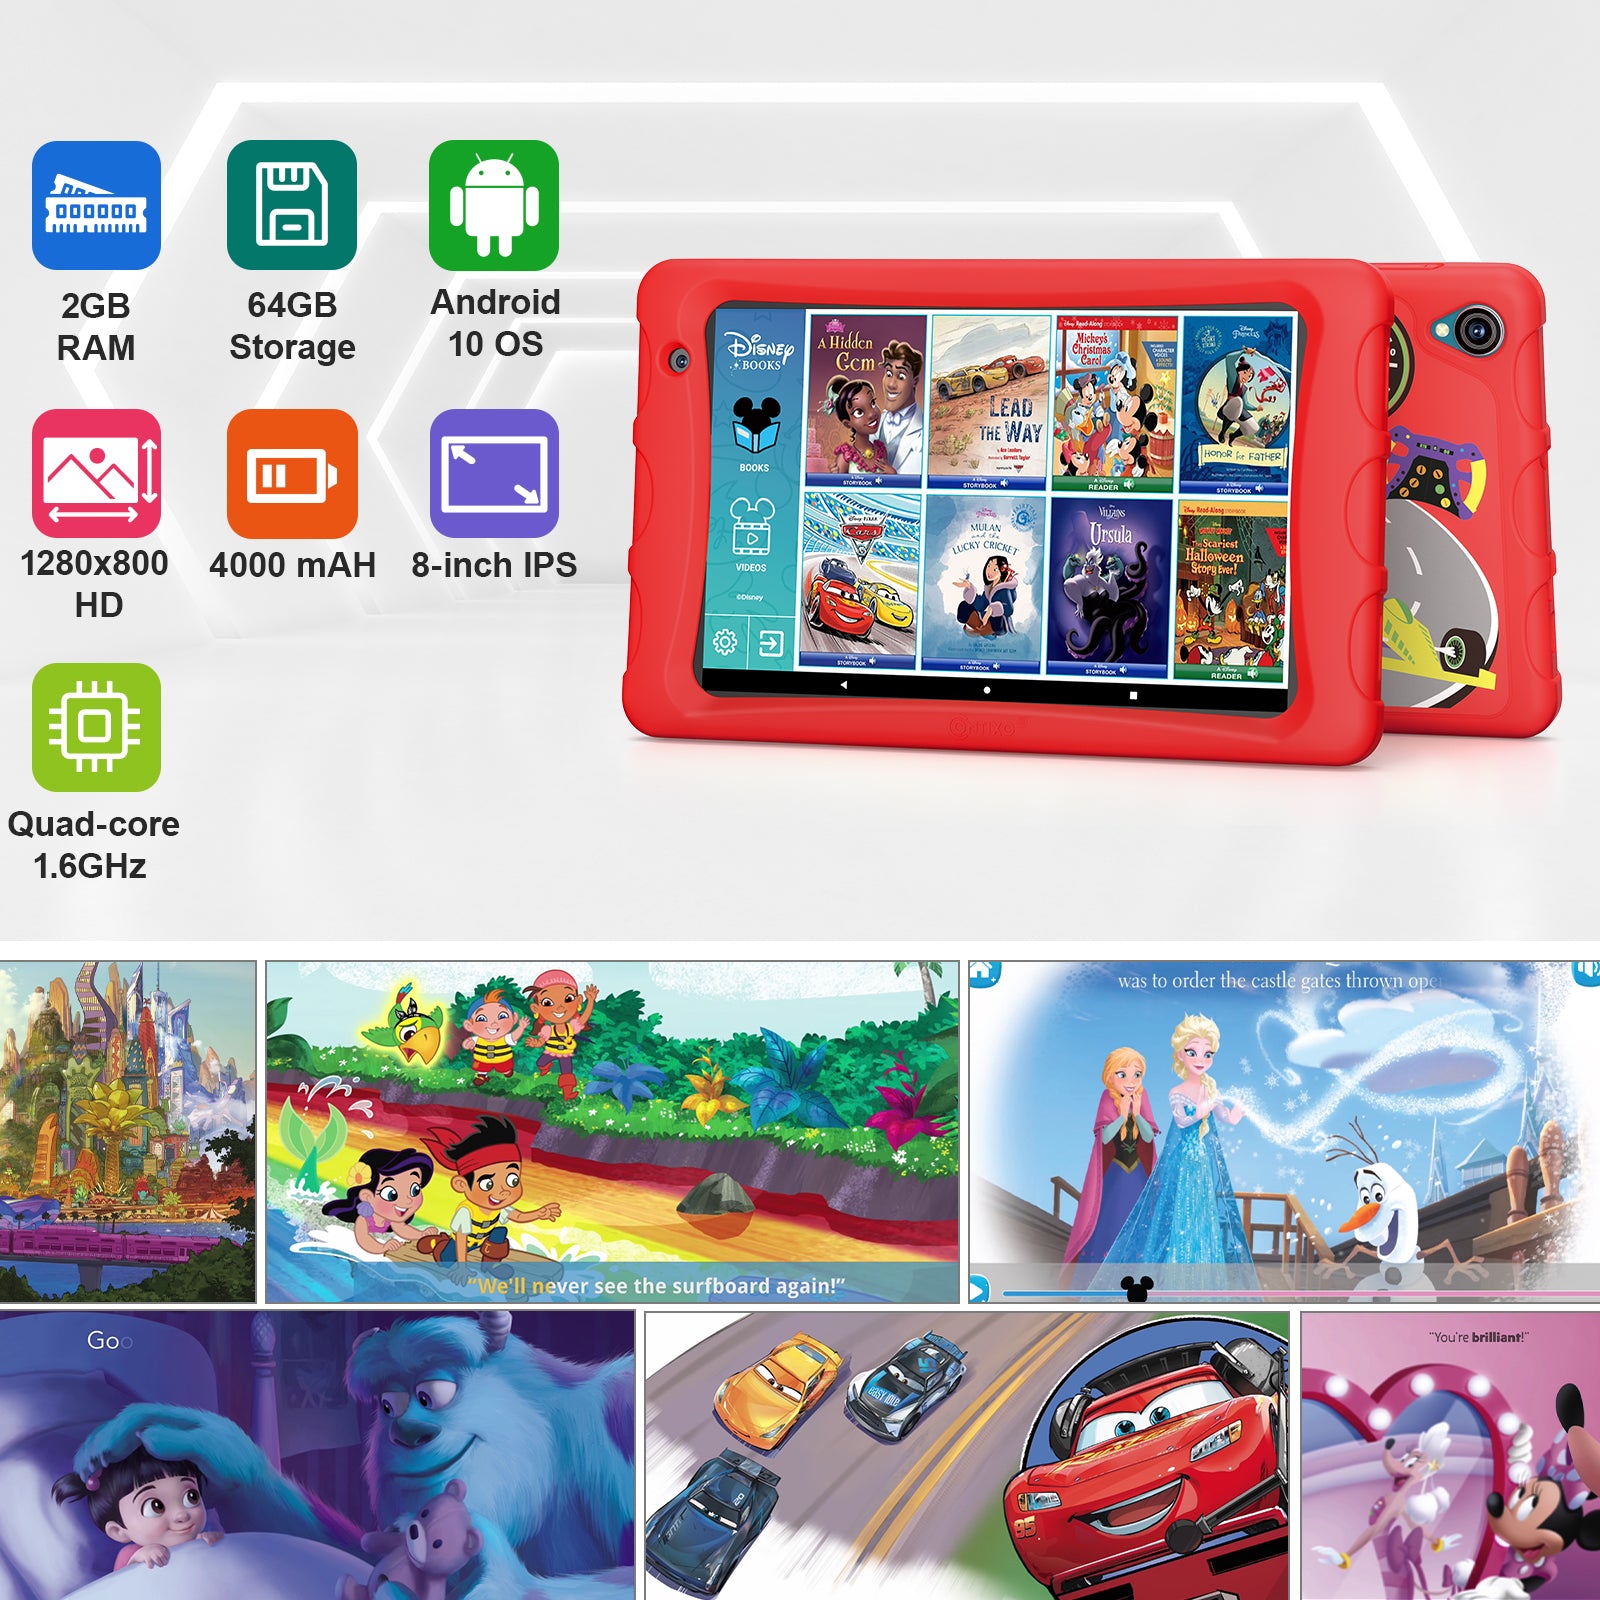 Contixo K80 Kids Tablet: A World of Learning and Fun at Their Fingertips